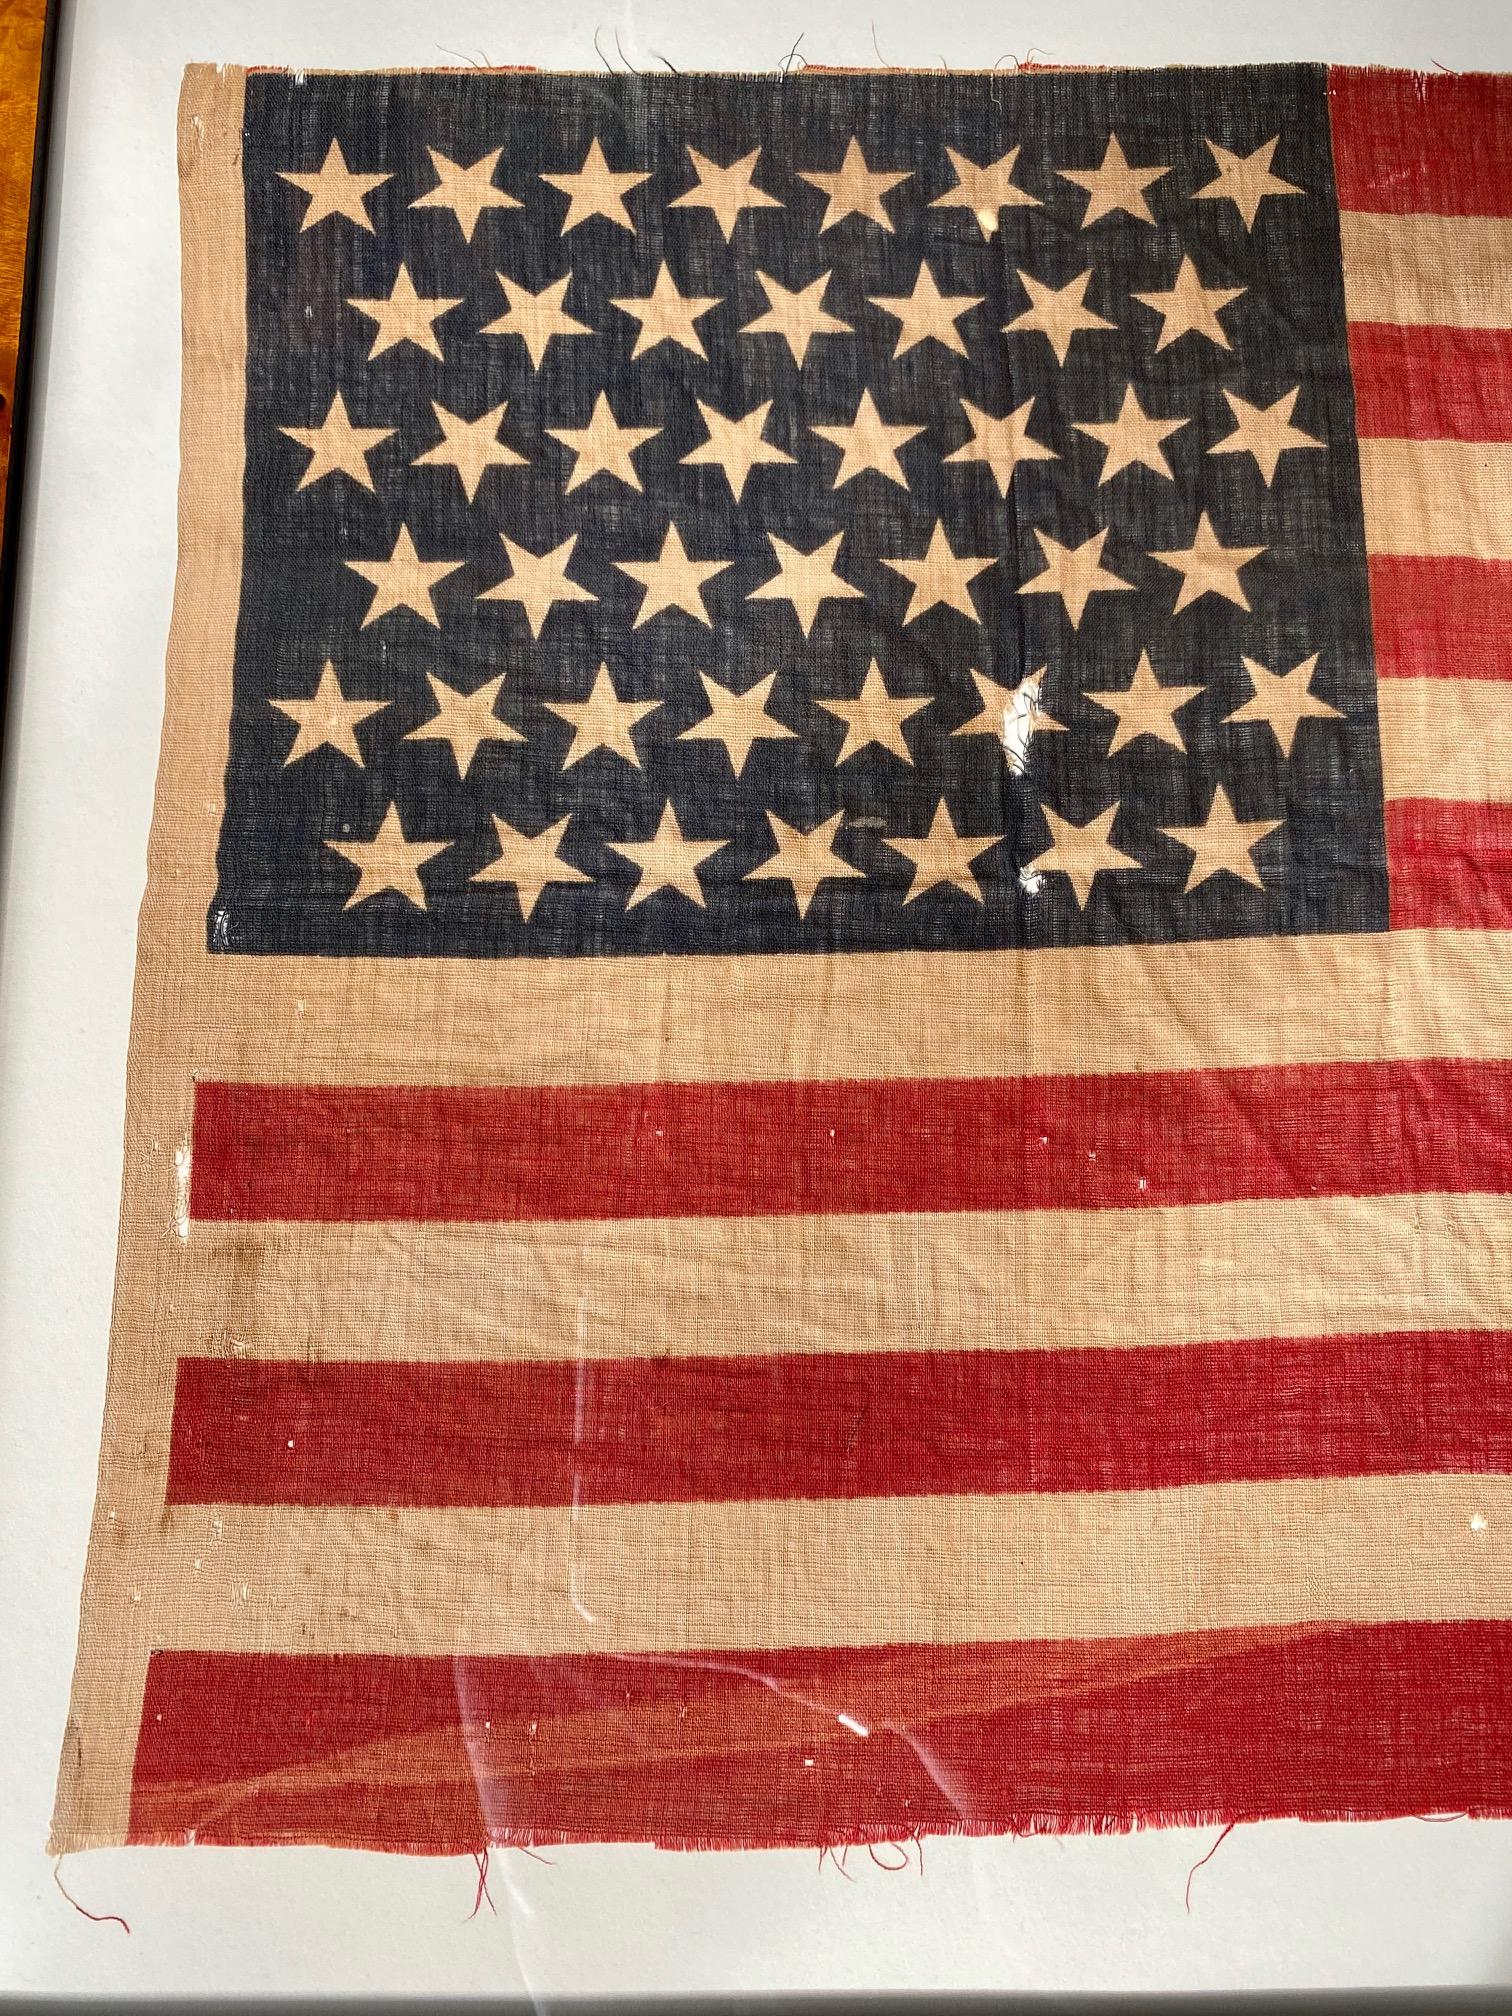 Antique American 45 Star Flag with the stars arranged in the early 